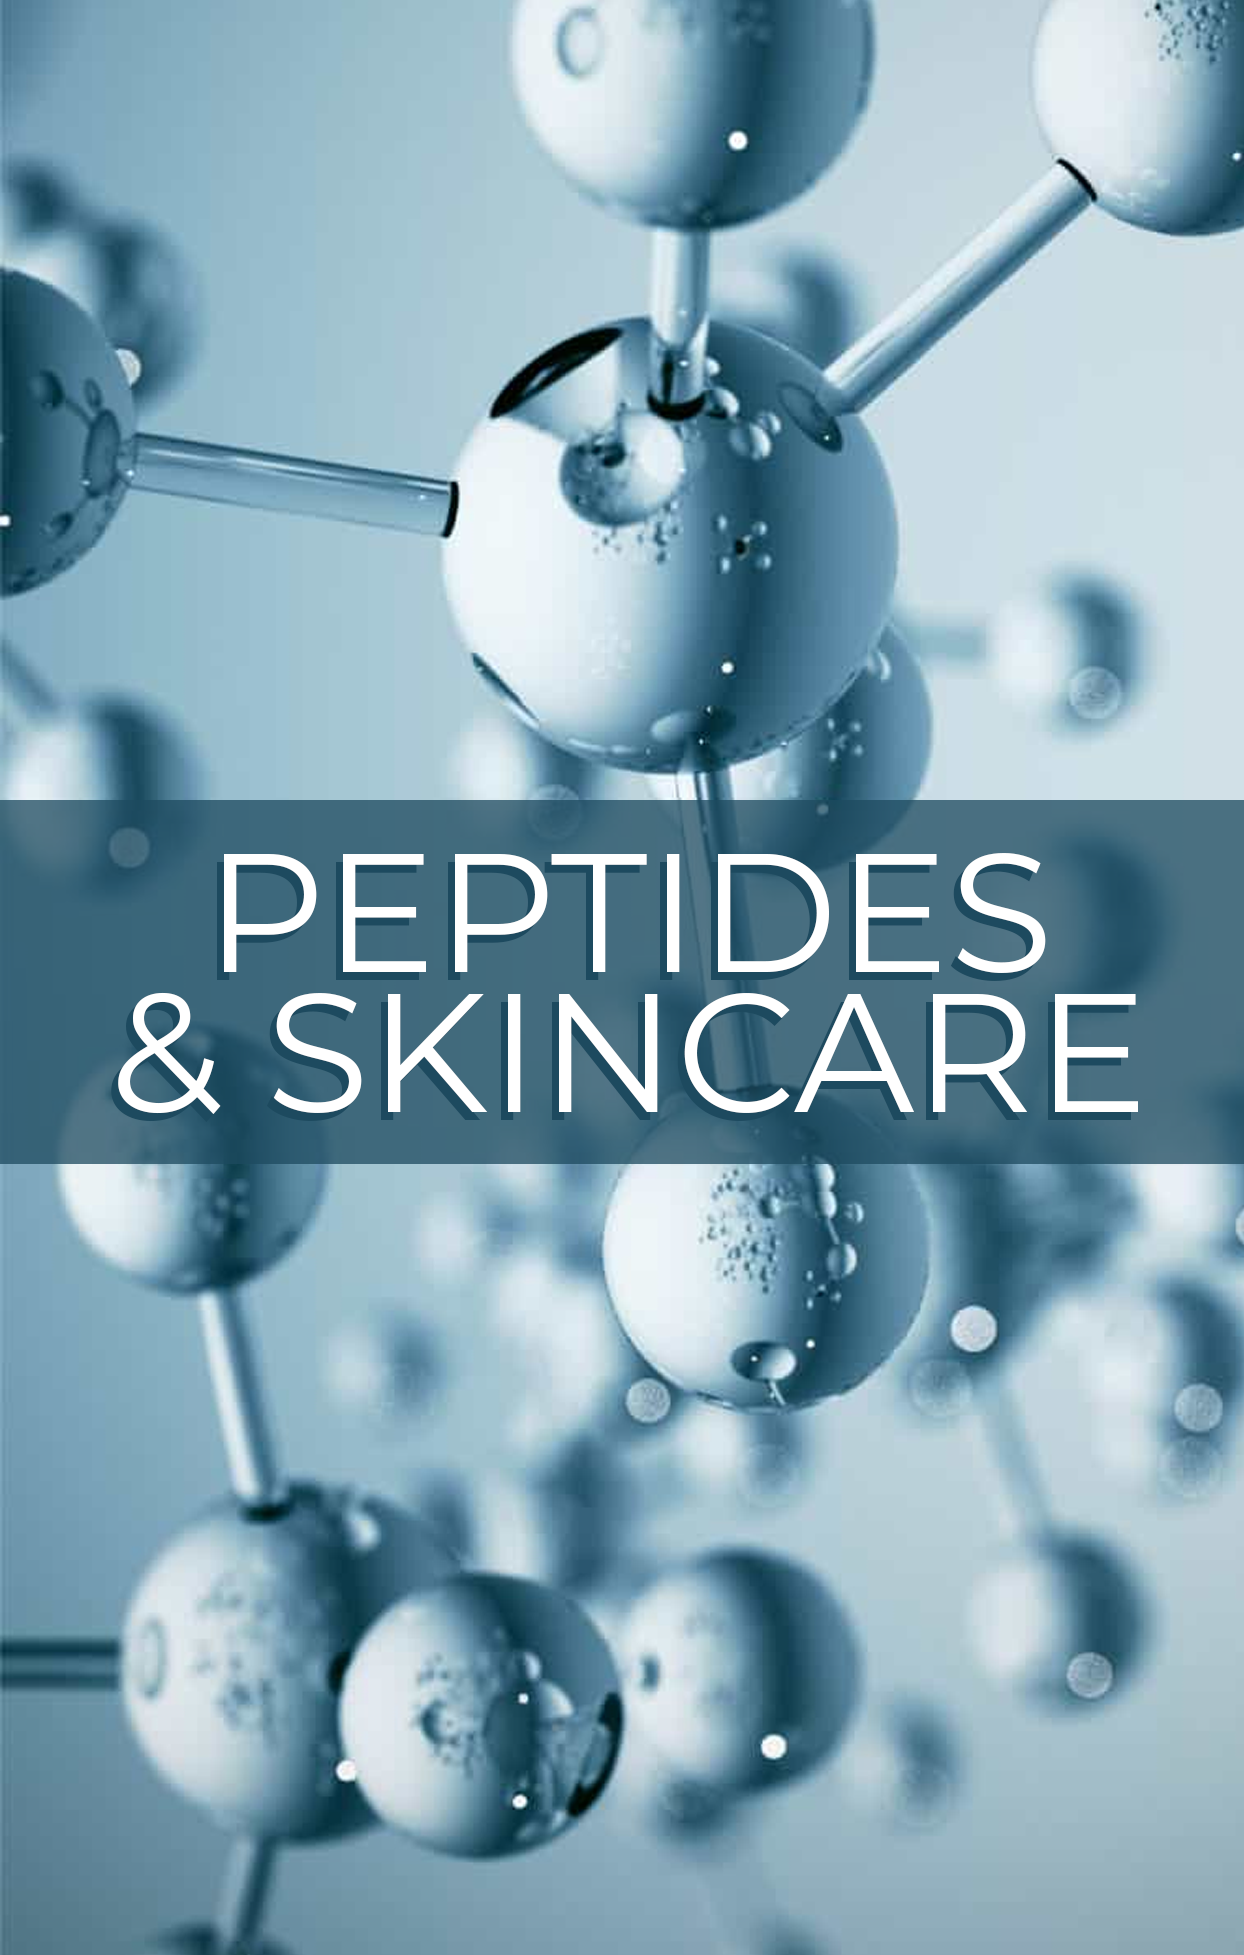 Peptides: What Are They and Do They Actually Work for Skincare?